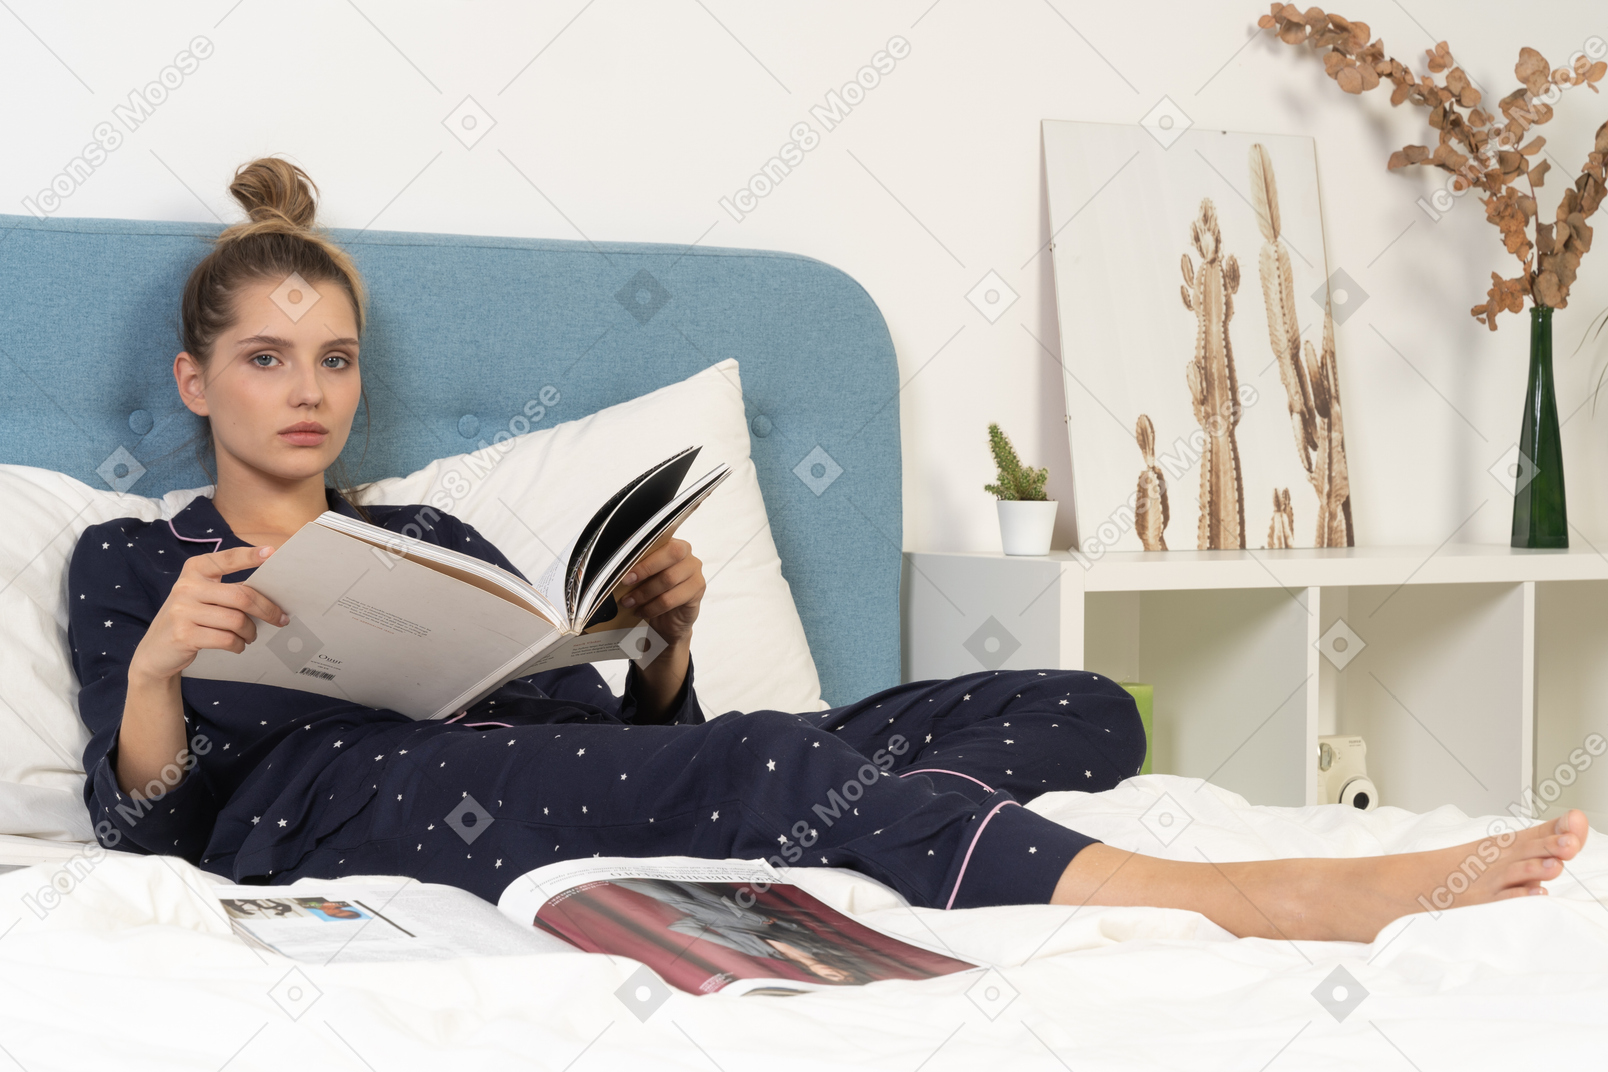 Full-length of a young female in pajama laying in bed while reading fashion magazine